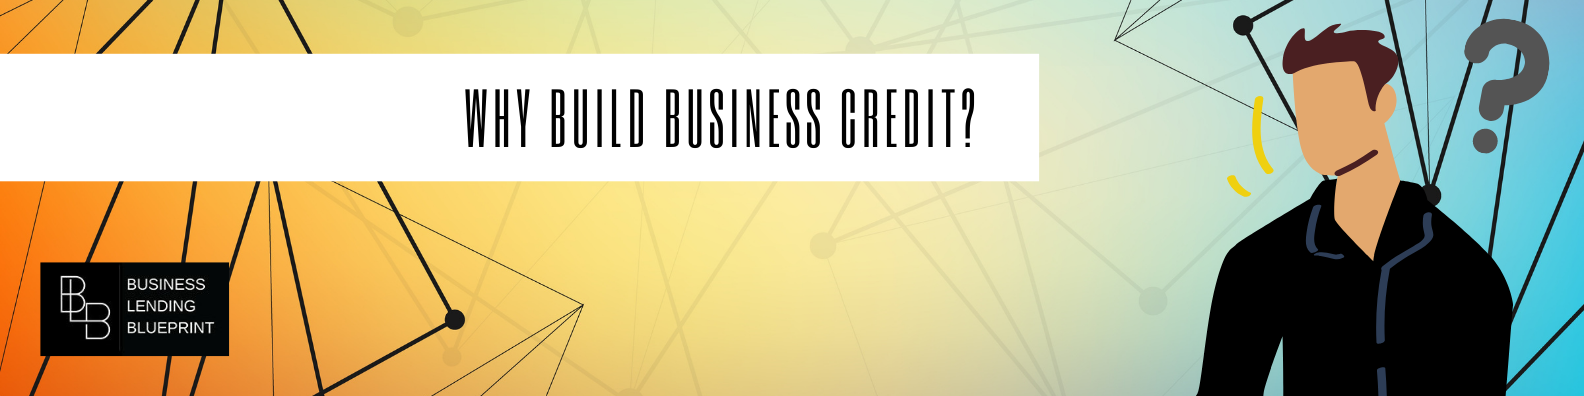 Why build business credit graphic